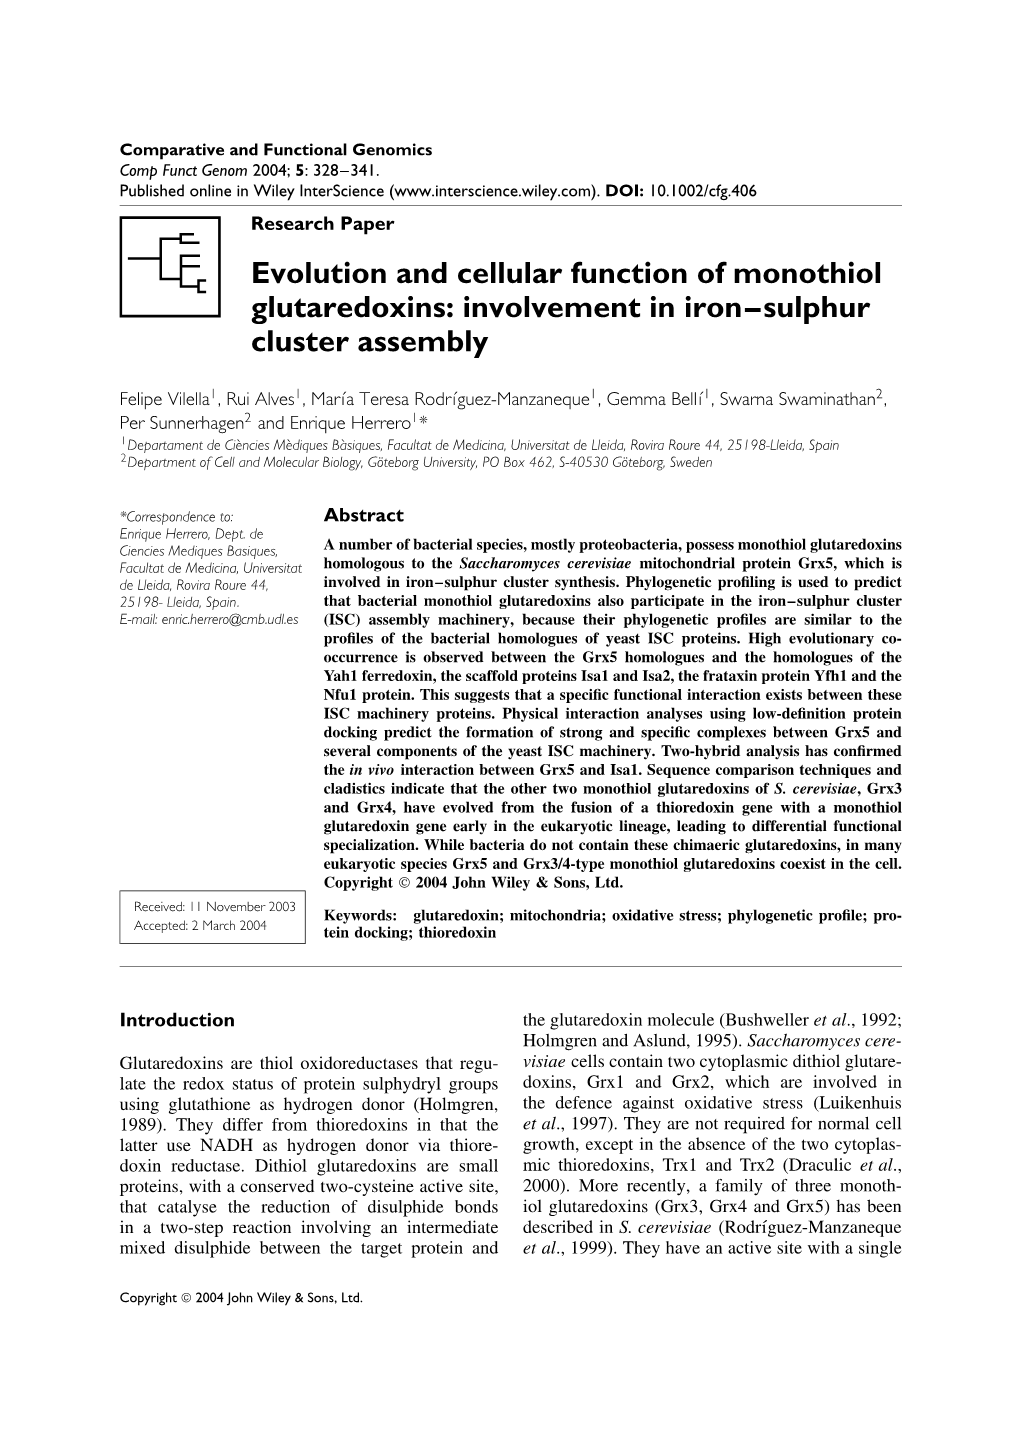 Evolution and Cellular Function of Monothiol Glutaredoxins: Involvement in Iron–Sulphur Cluster Assembly